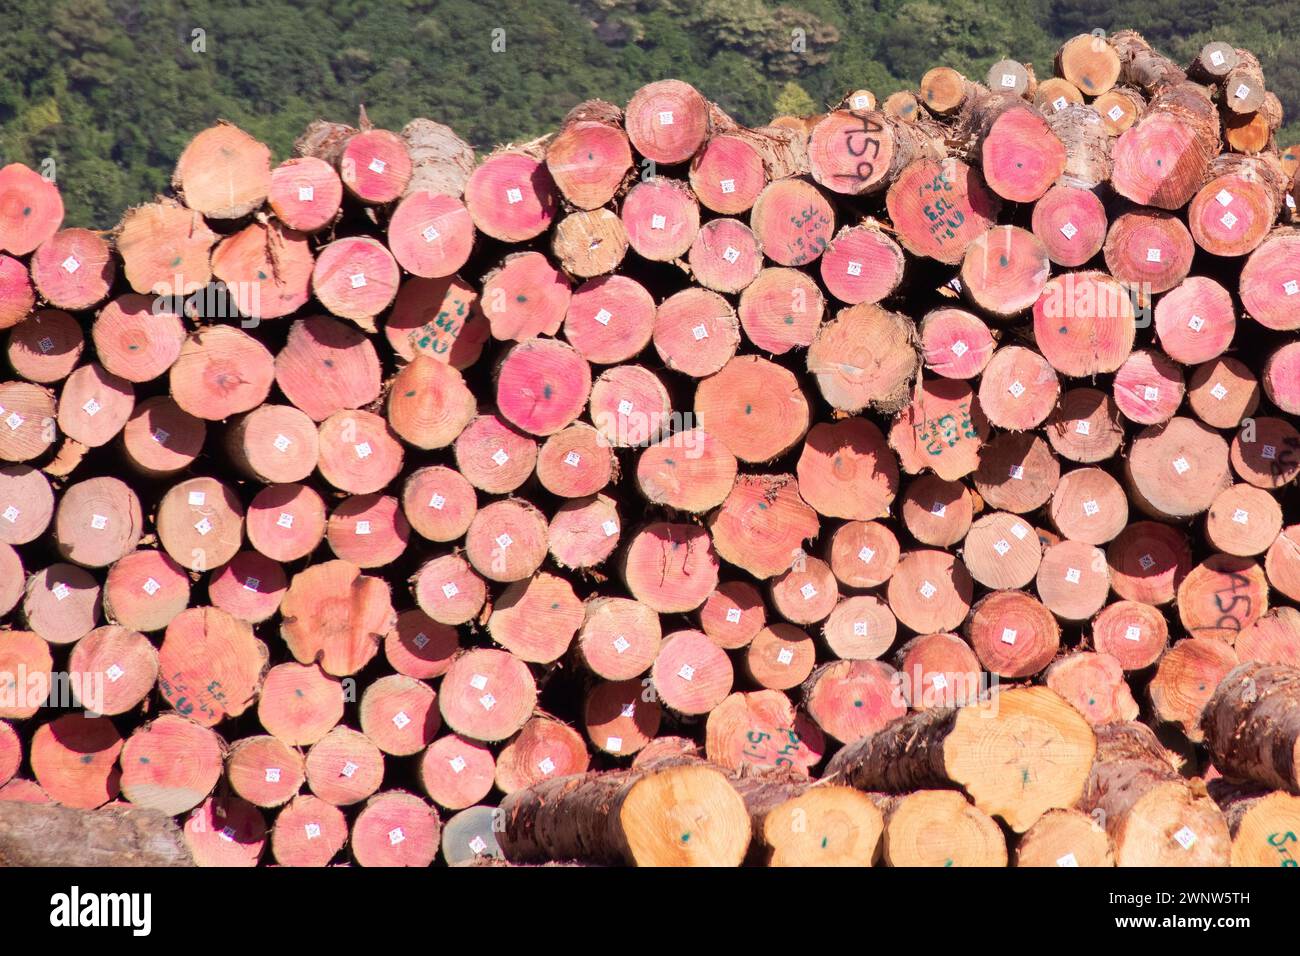 Large amount of felled tress lumber timber logs with focus on the red wood stacked ready for export from Picton New Zealand as primary export business Stock Photo